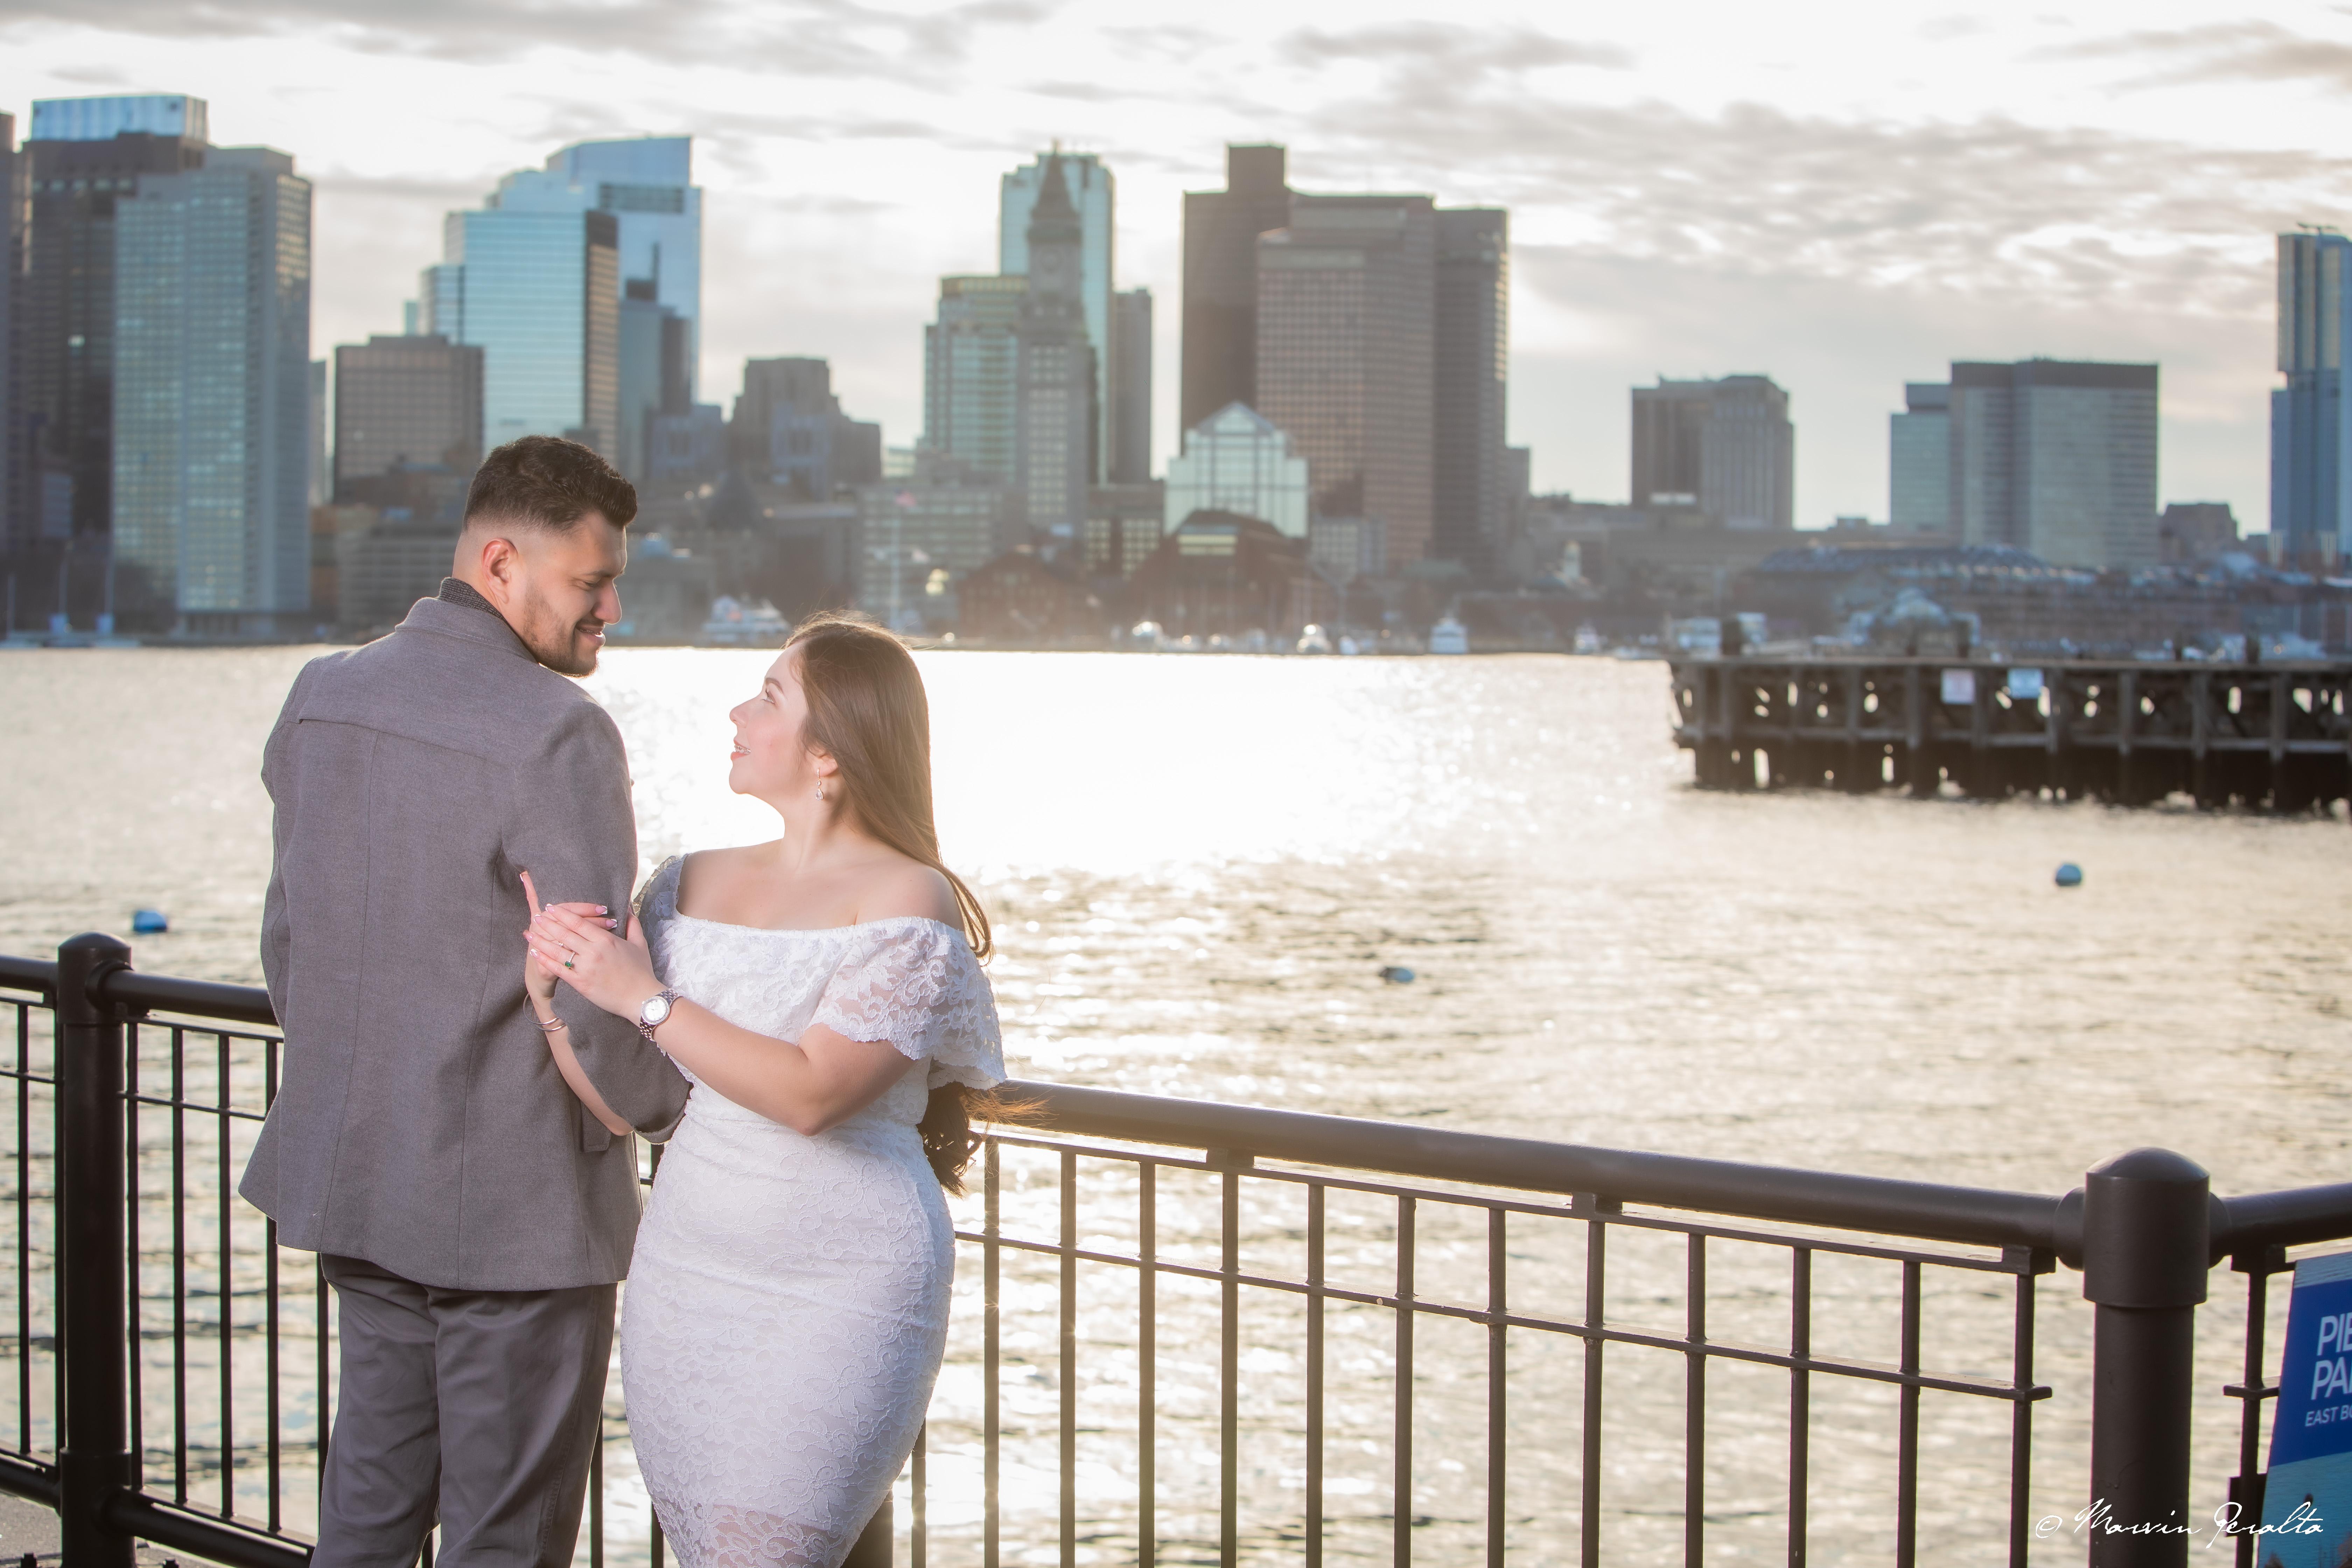 The Wedding Website of Vivian Aguirre and Norvin Reyes